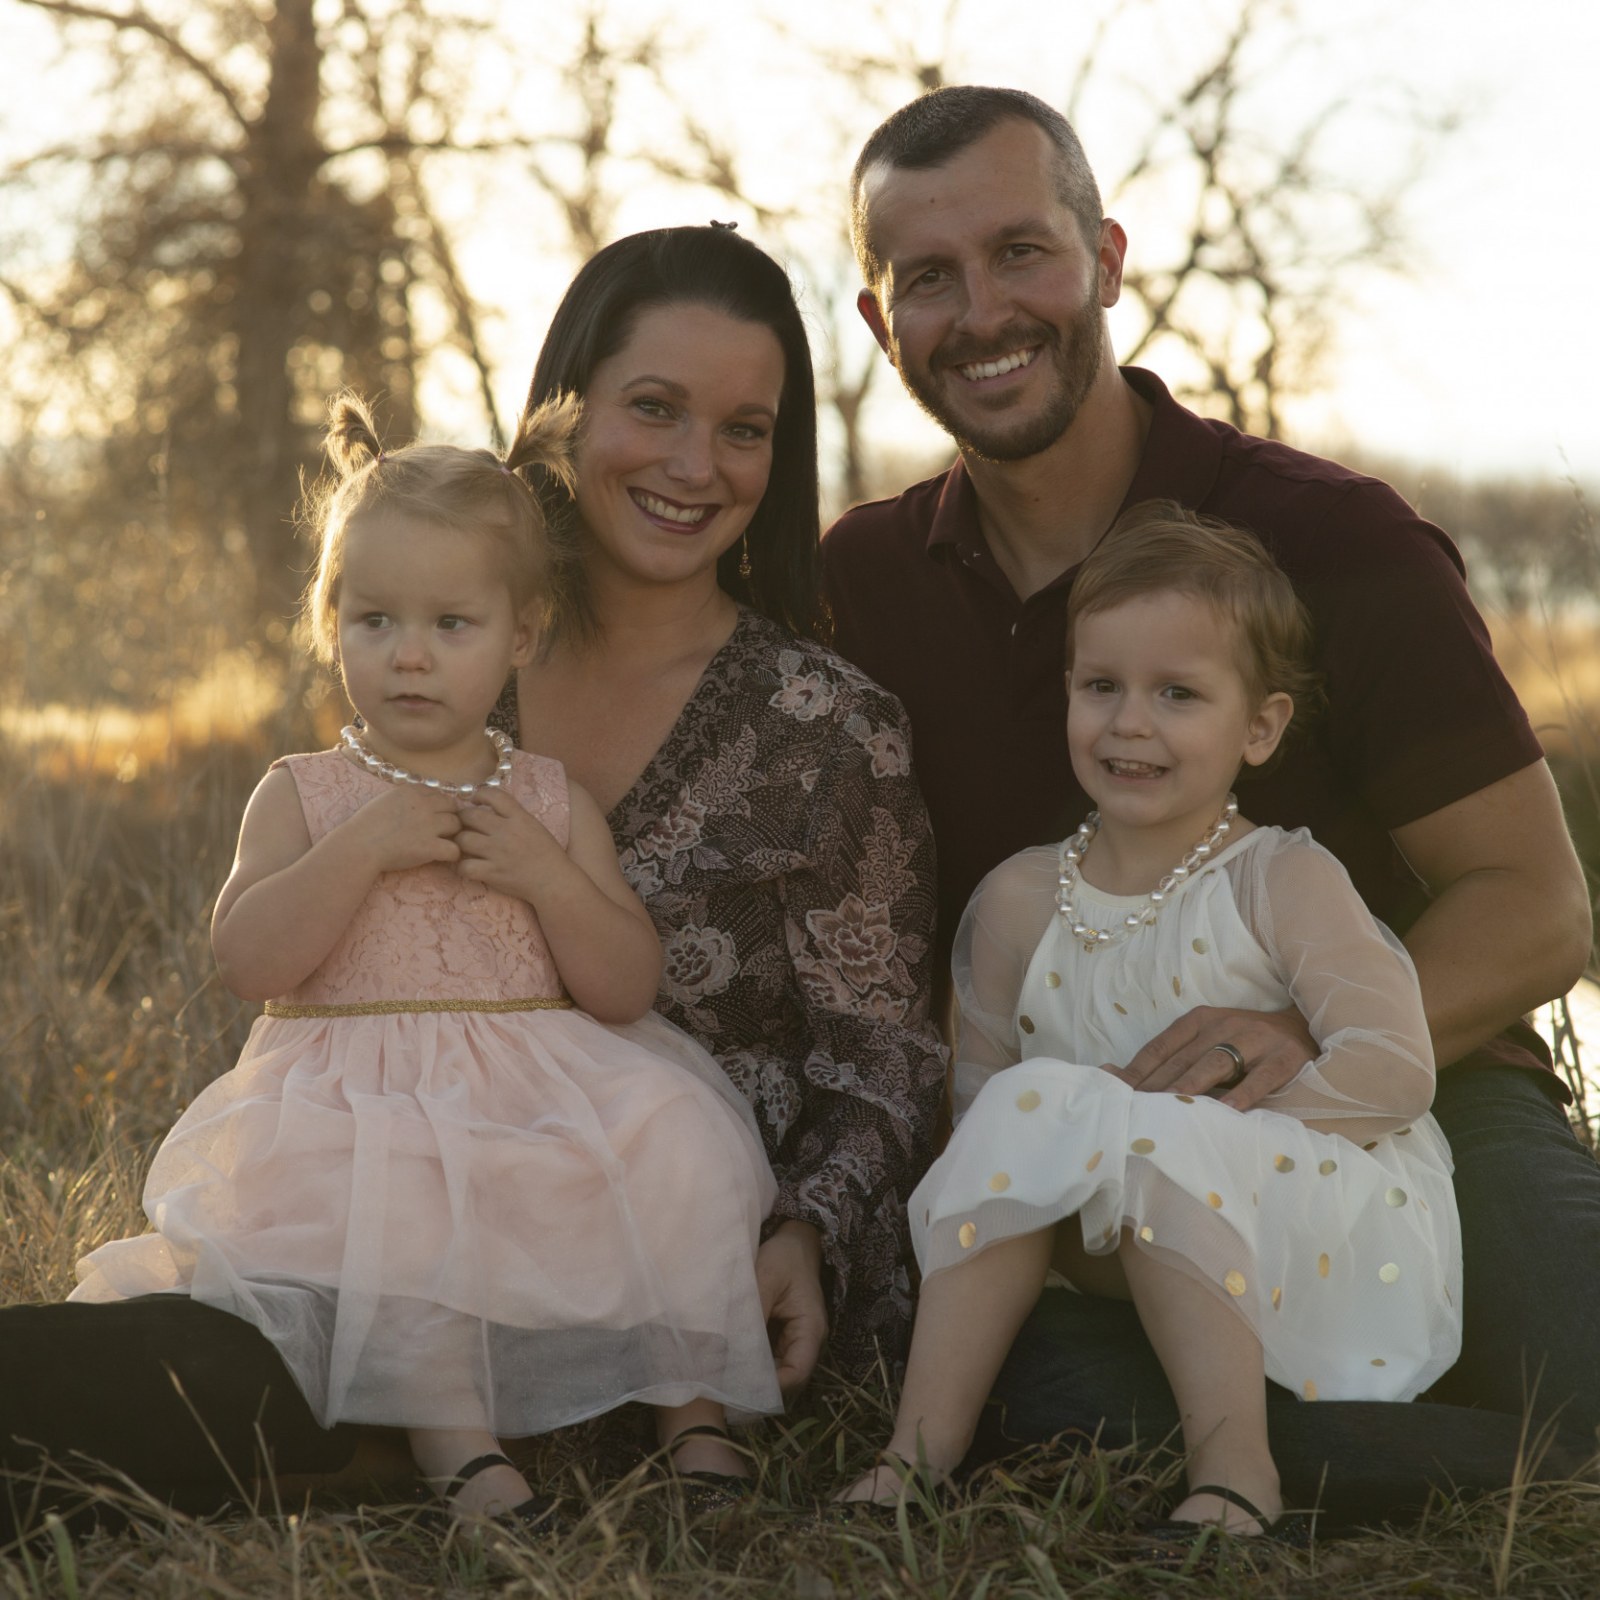 CHRIS WATTS: Journey To Familicide by Deacon Archer